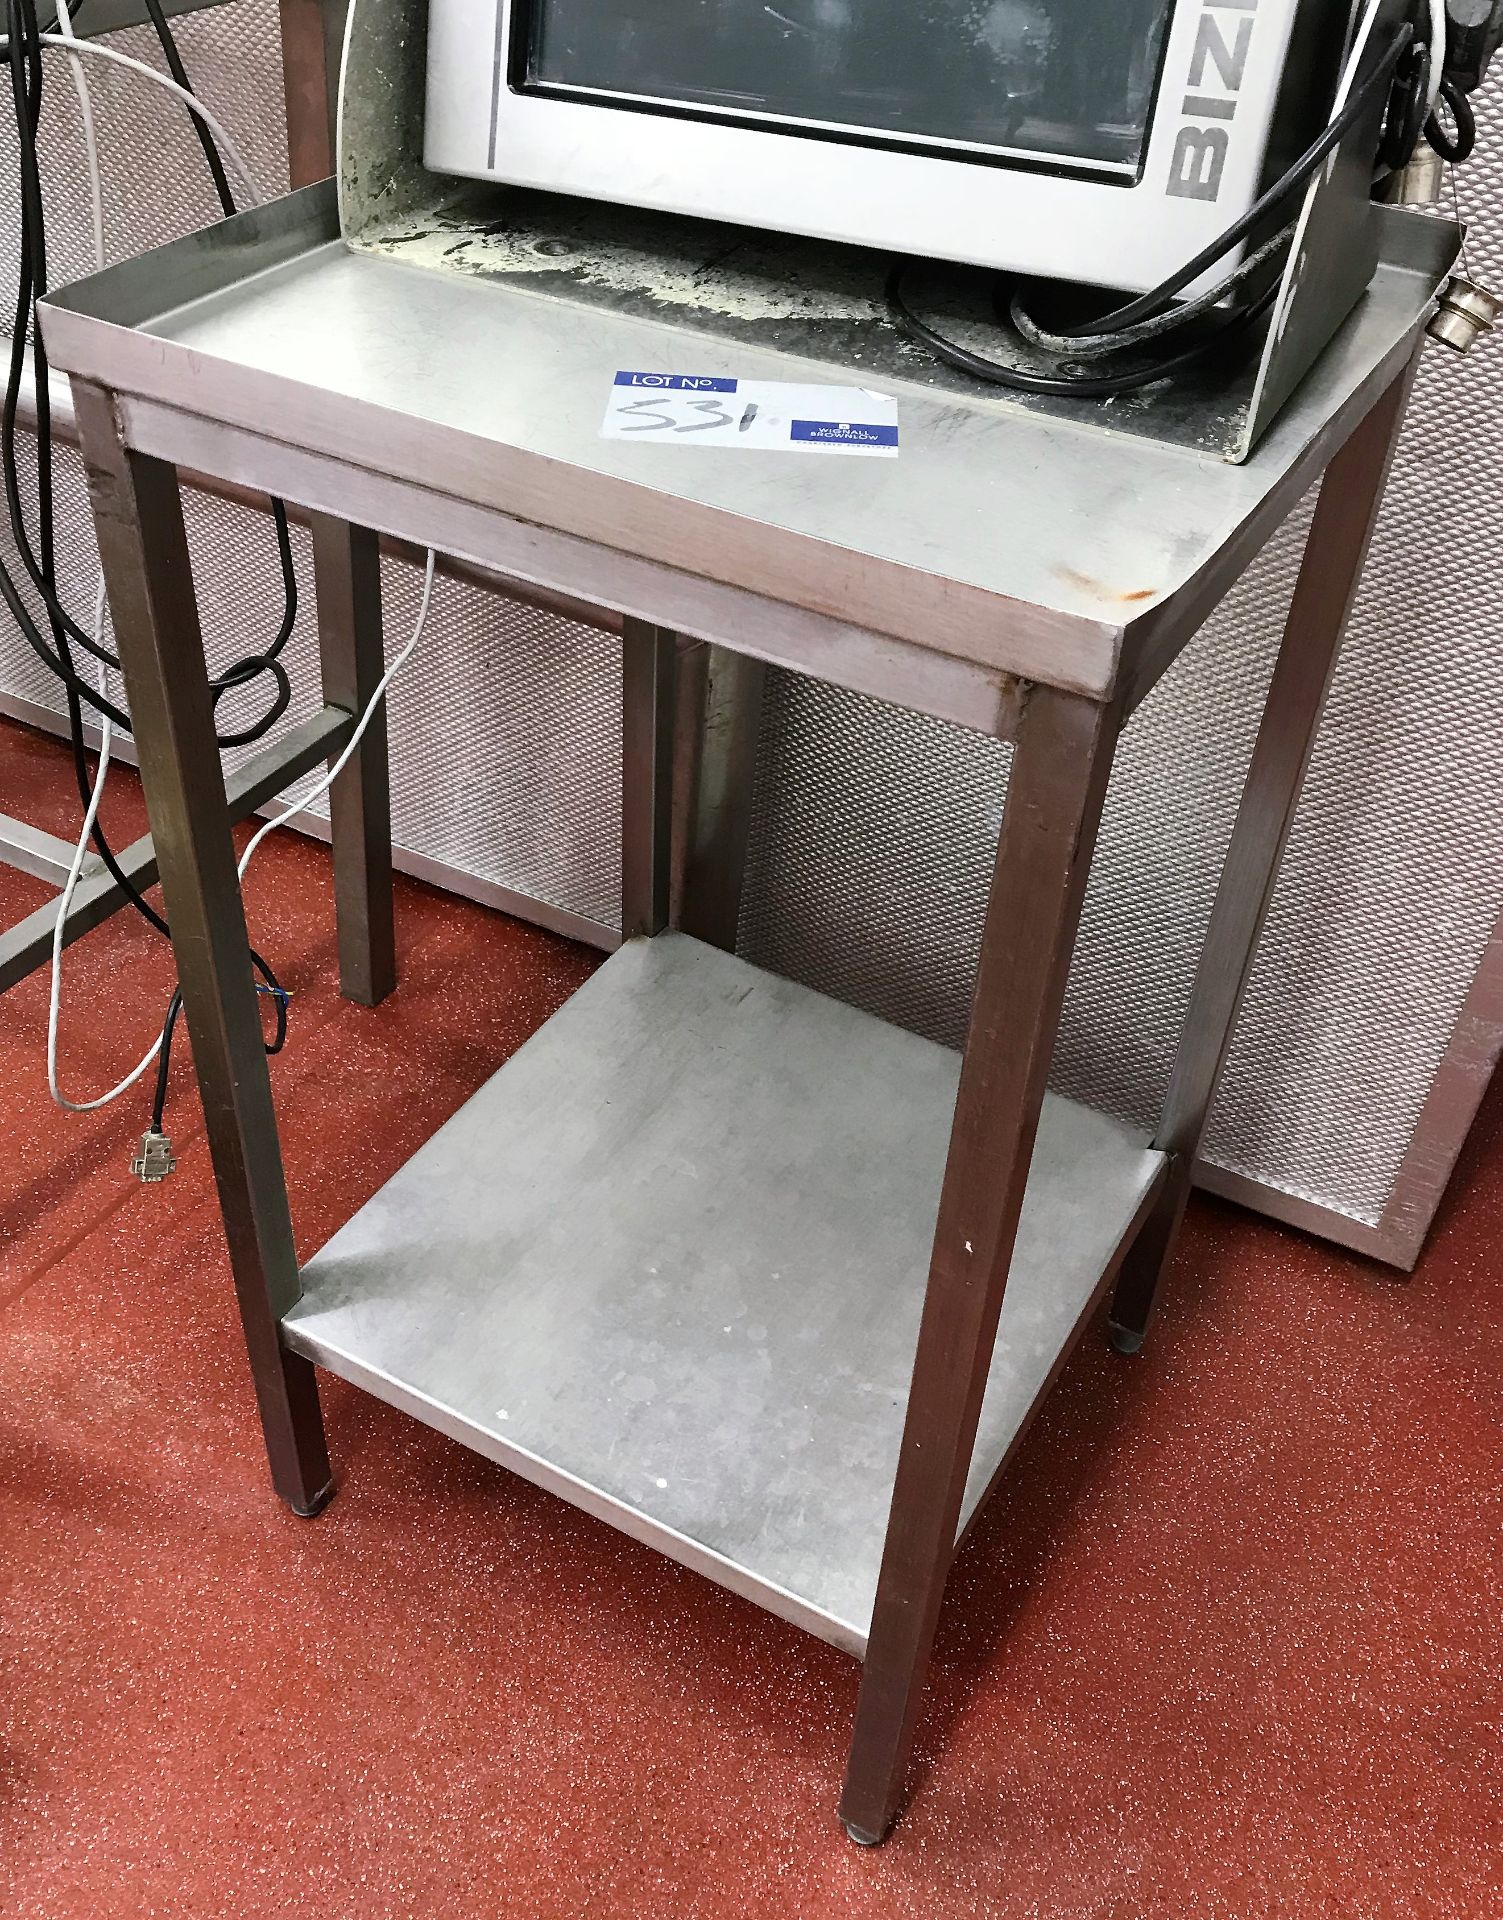 A Stainless Steel 2 tier Stand, 500 x 500 x 895mm h (Cornford Road, Blackpool).